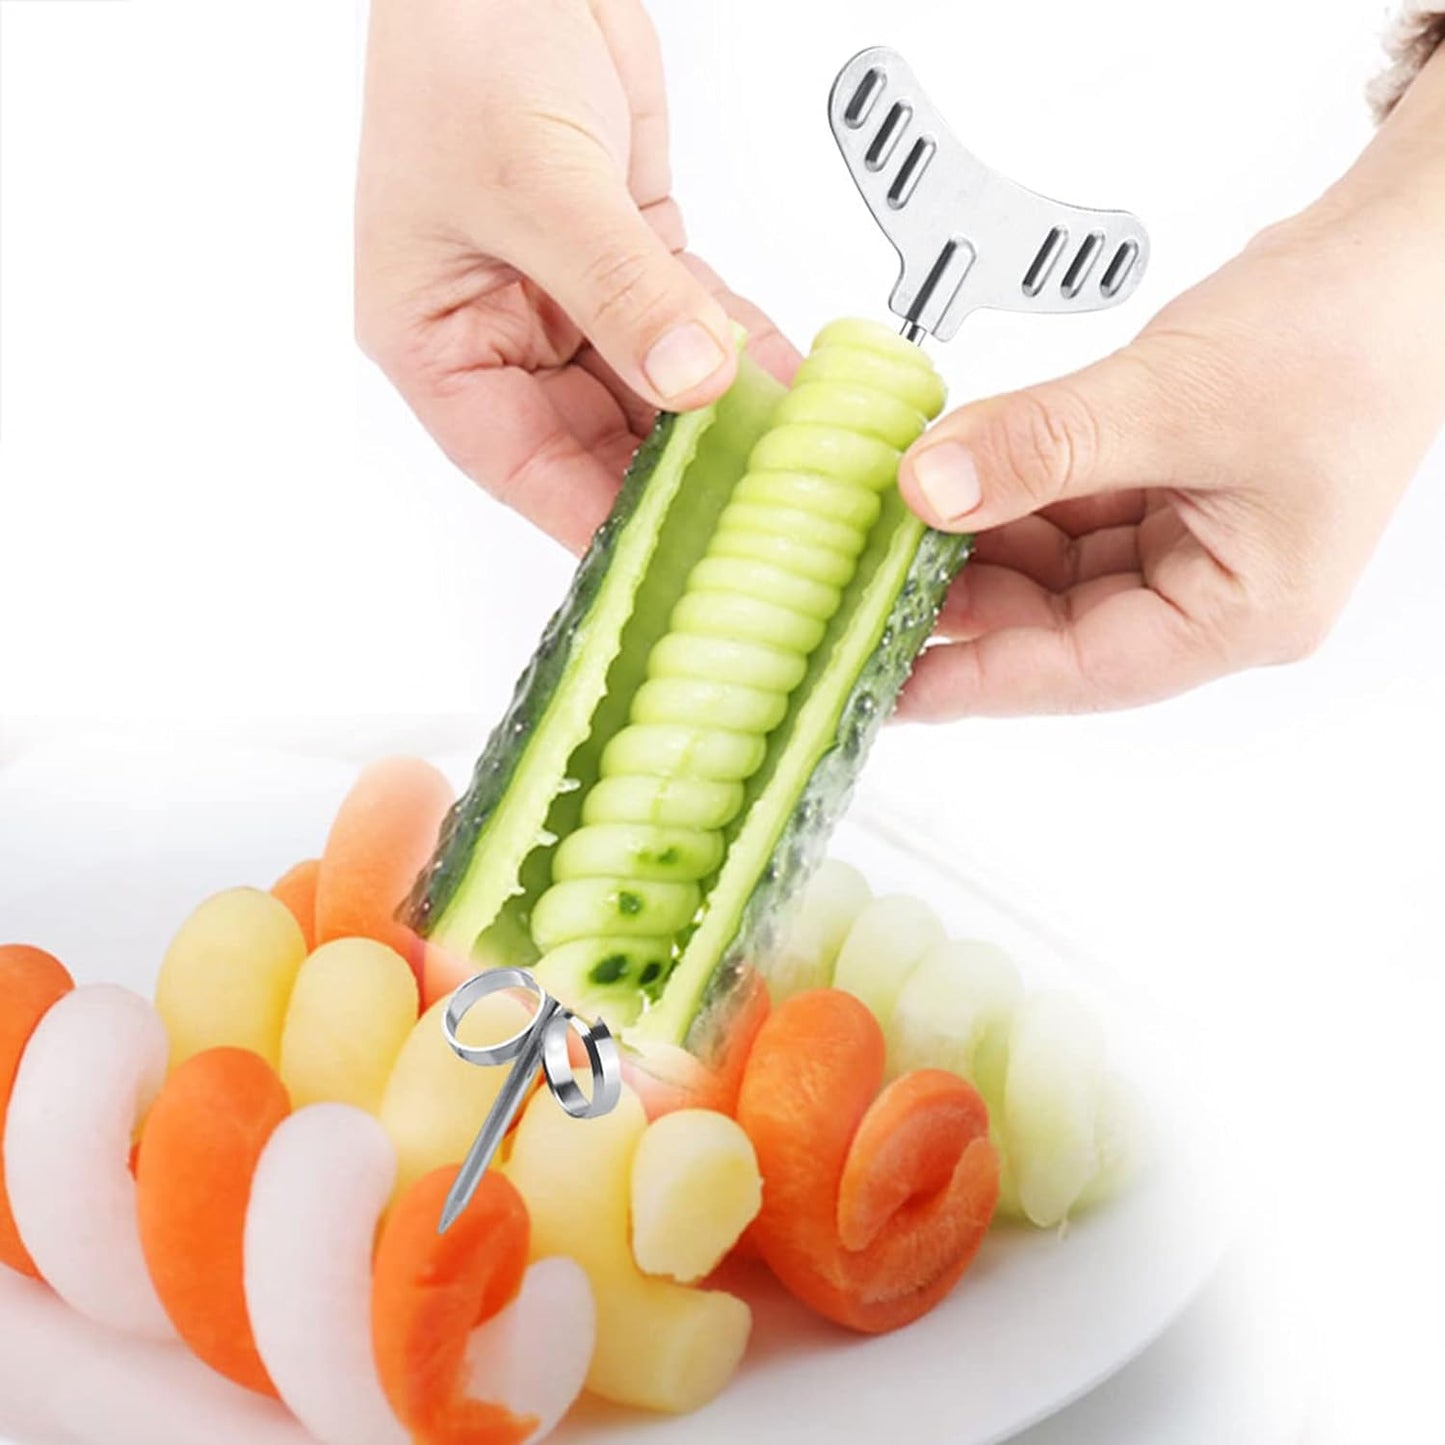 2Pcs / Set Stainless Steel Vegetable Spiral Cutter Manual Potato Carrot Cucumber Carving Roller, Vegetables Spiral Knife Carving Tool  Haofy   